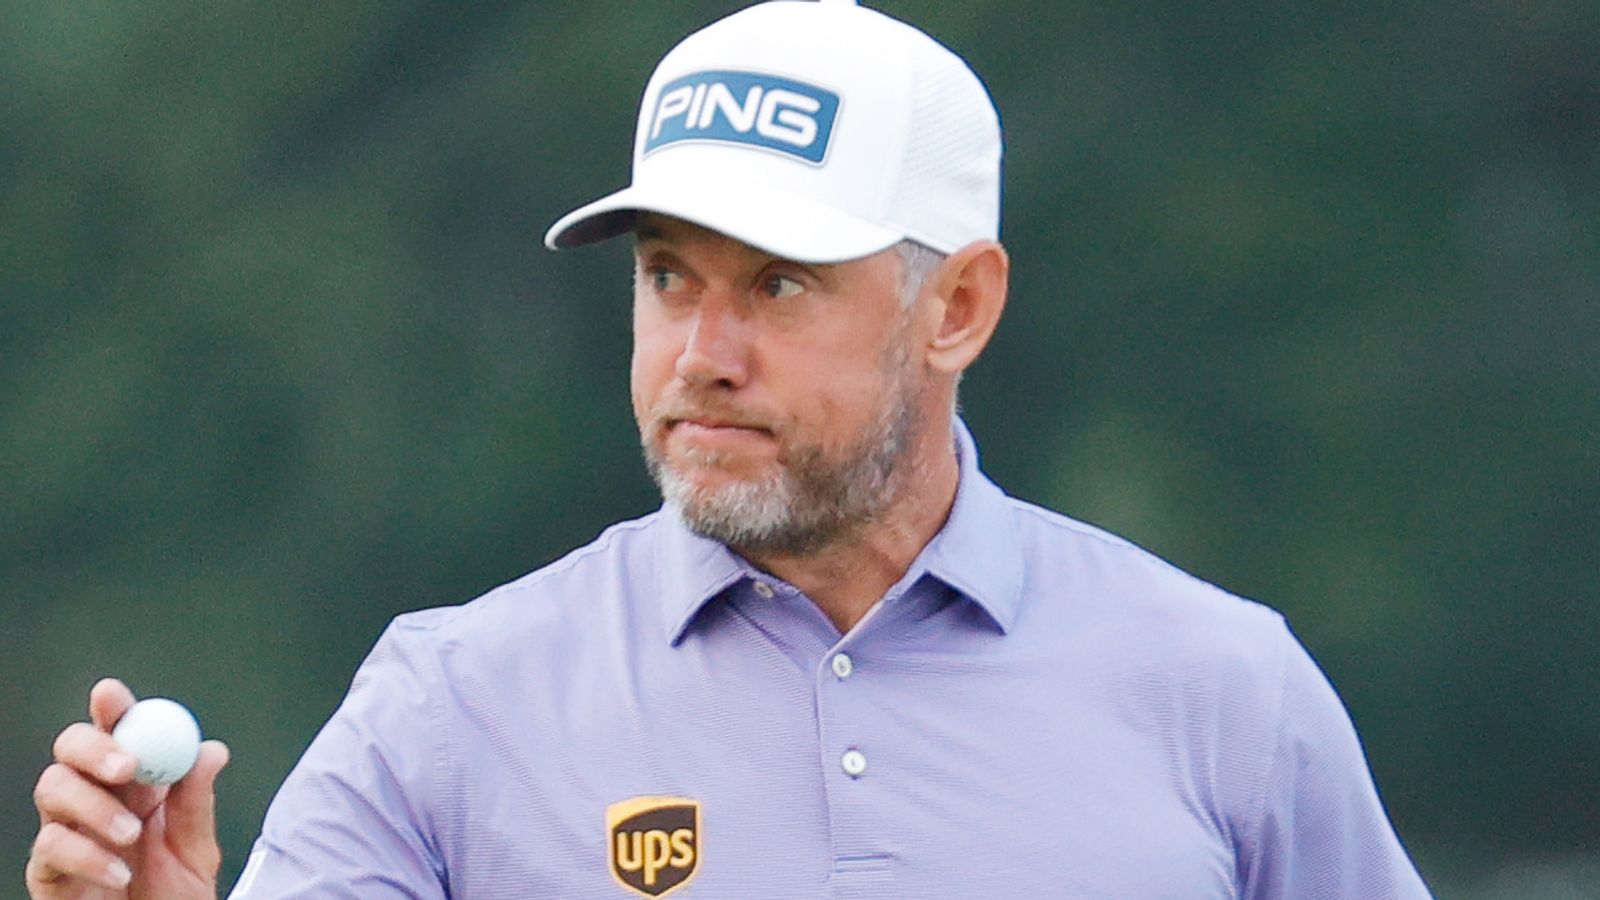 Us Open Lee Westwood Looking To Return To Form And Challenge For Major Victory At Torrey Pines